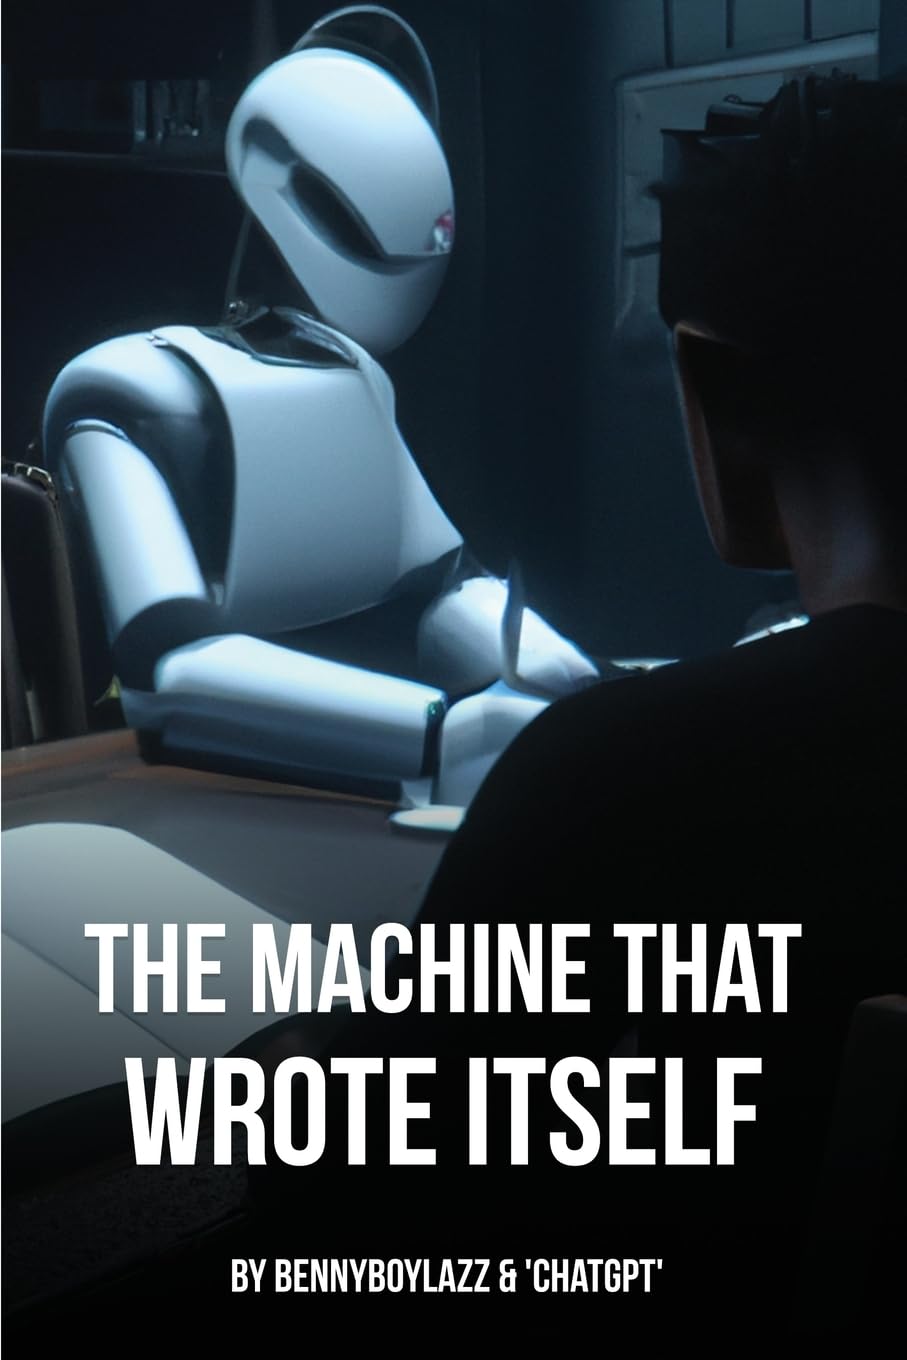 The Machine that Wrote Itself